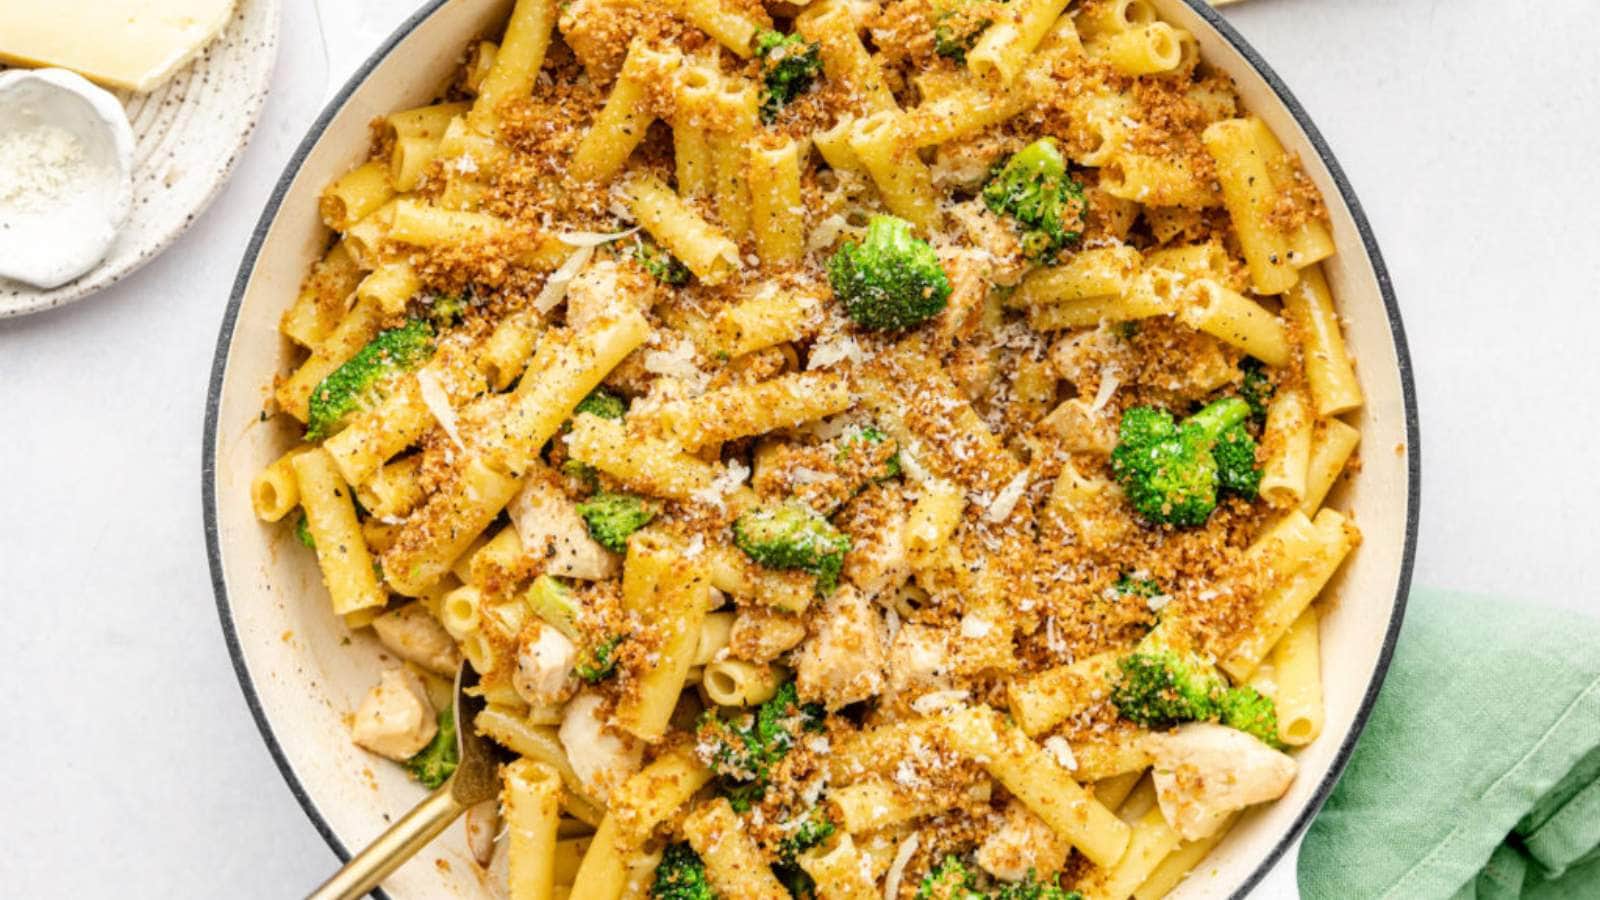 Chicken Broccoli Ziti with Crunchy Bread Crumbs recipe by My Every Day Table.